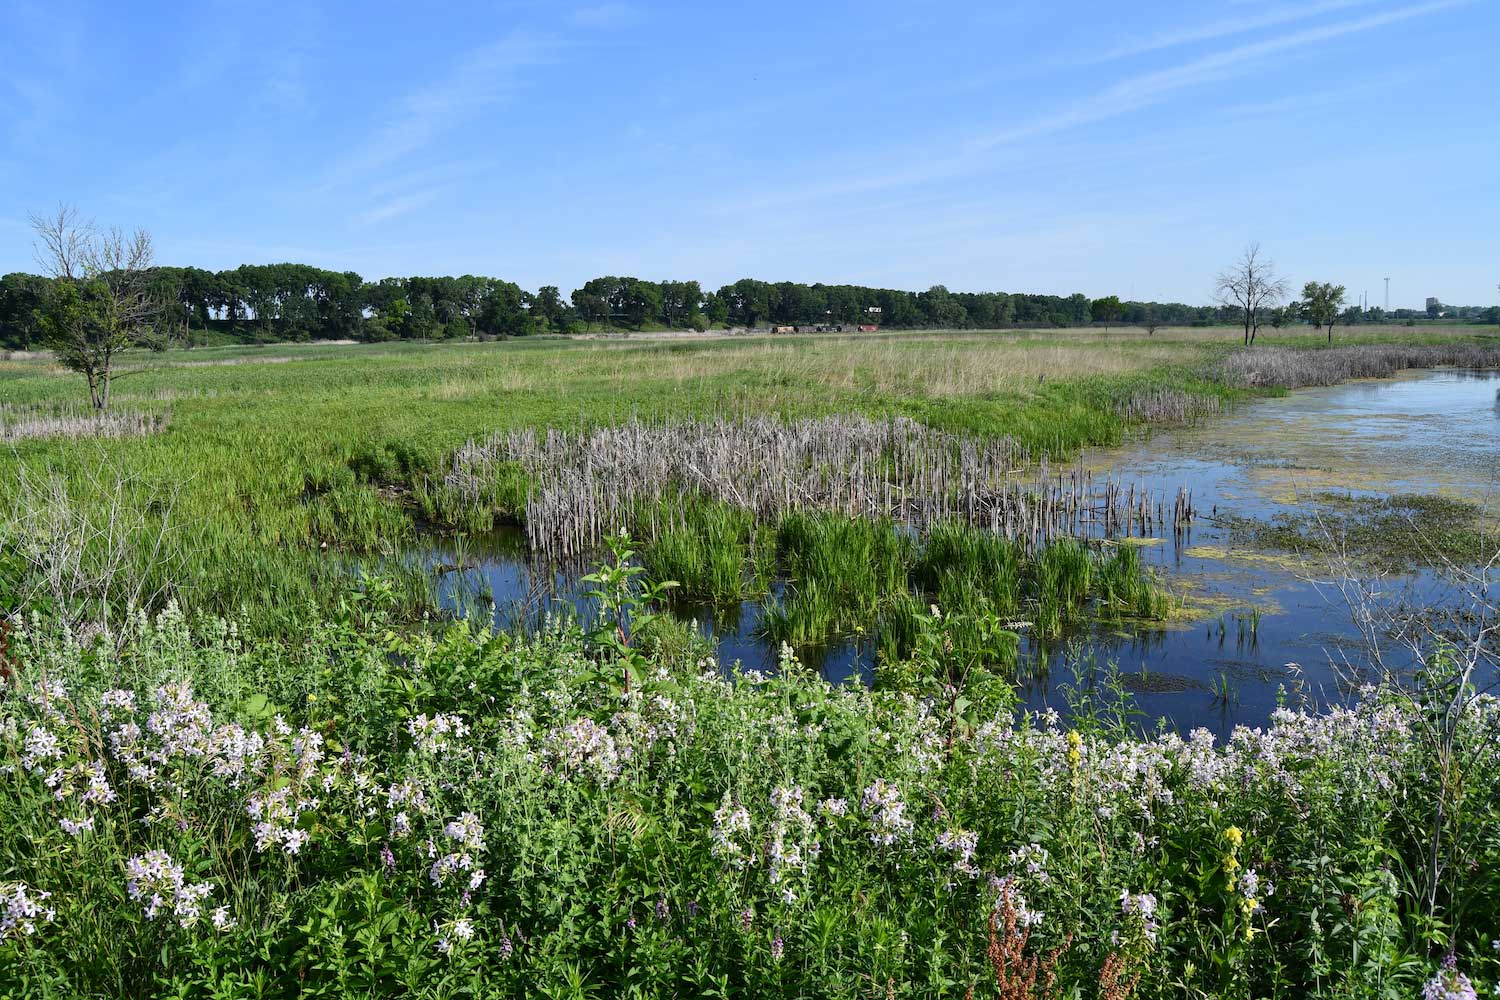 A wetland with tall grasses.